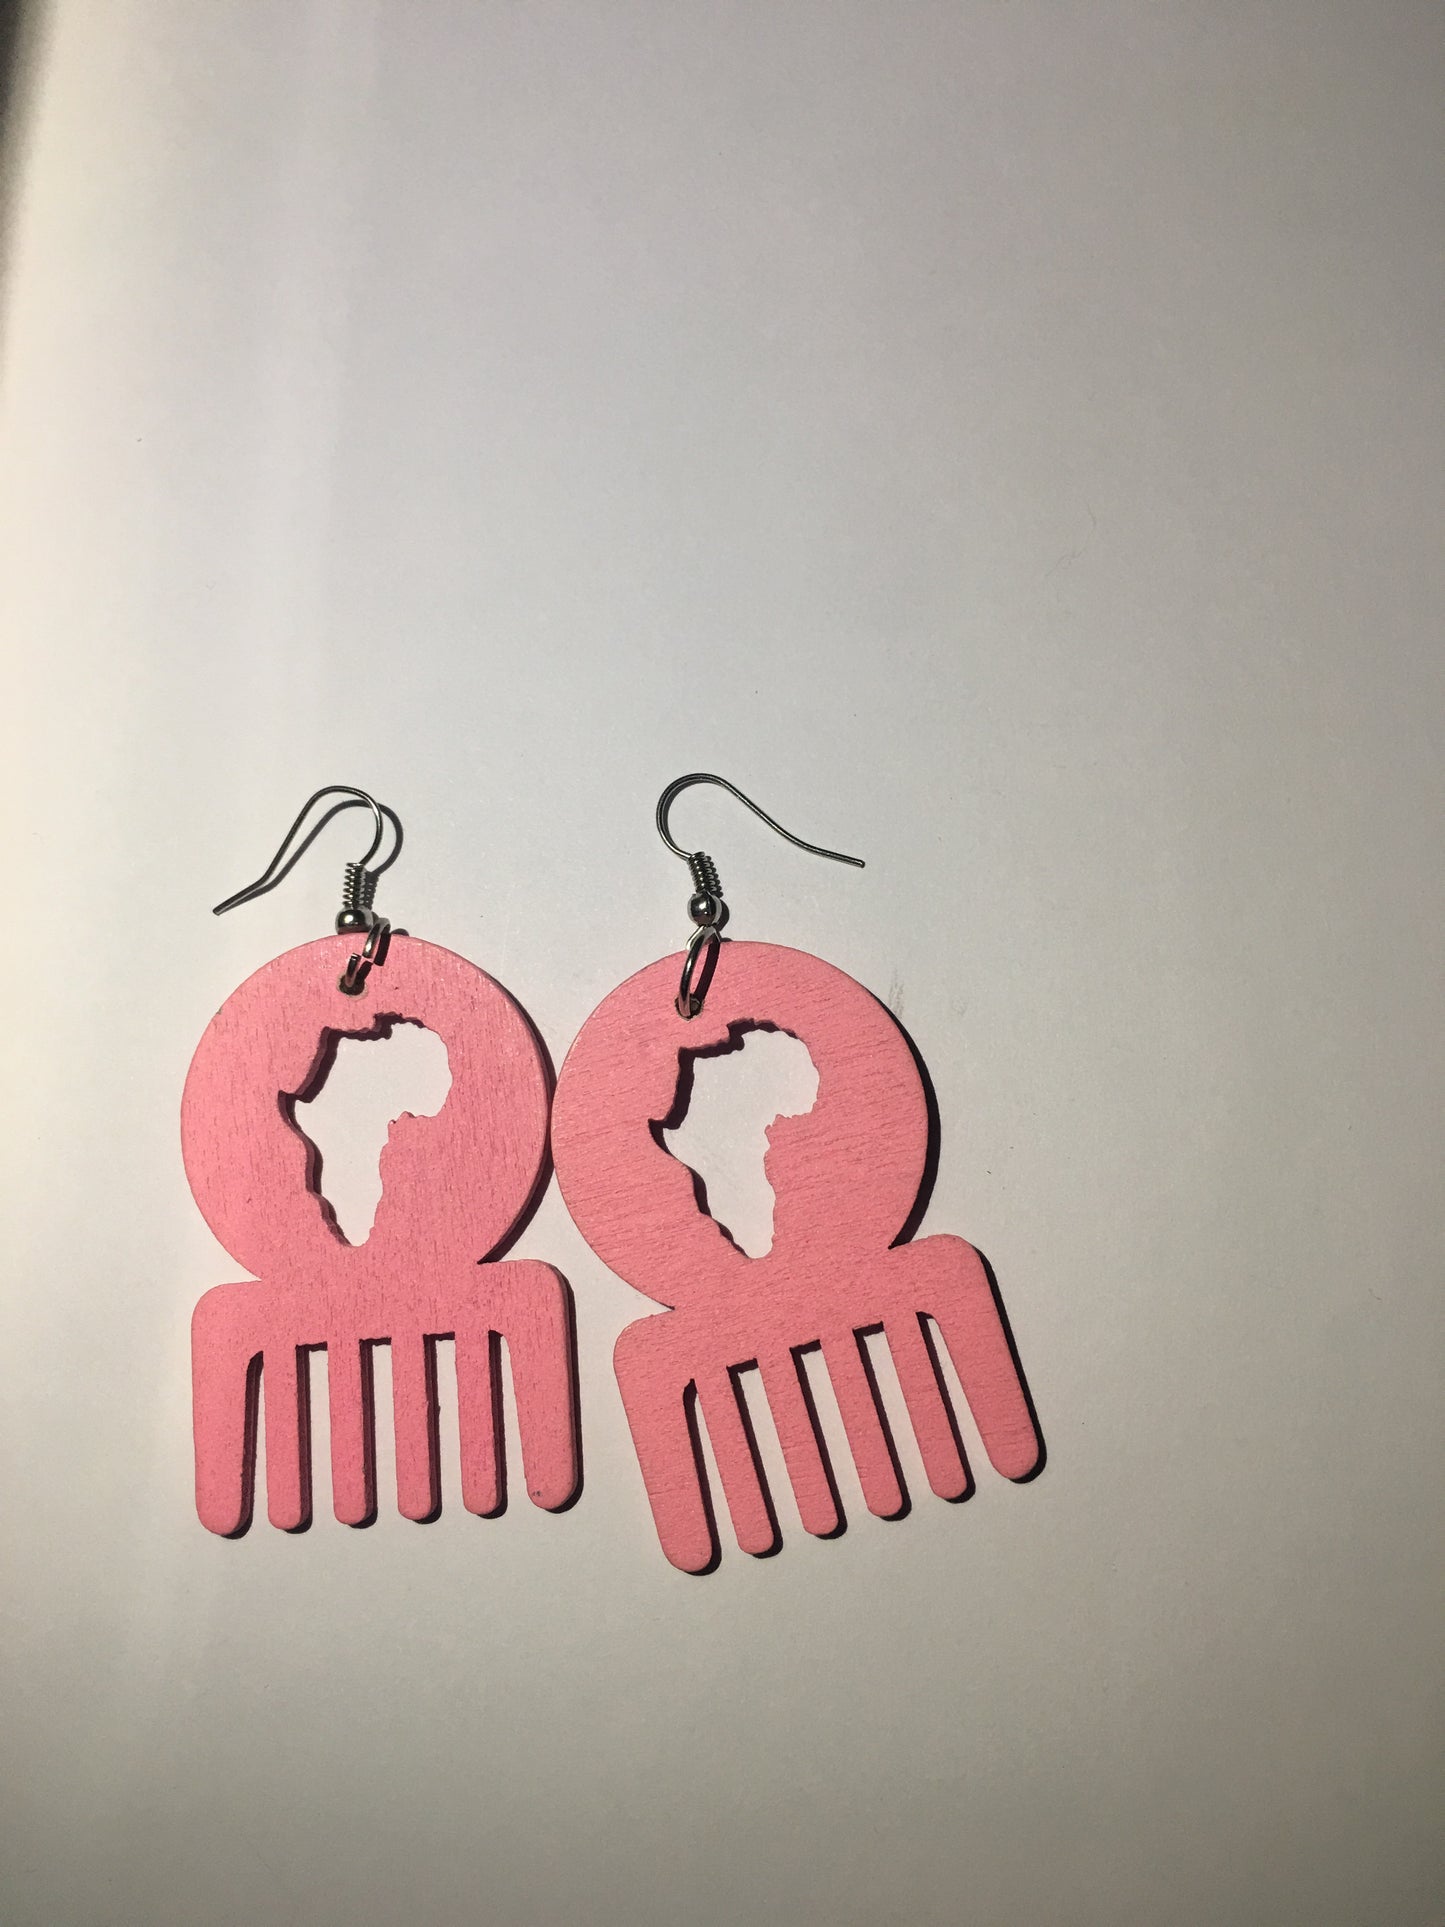 Small afro comb earrings